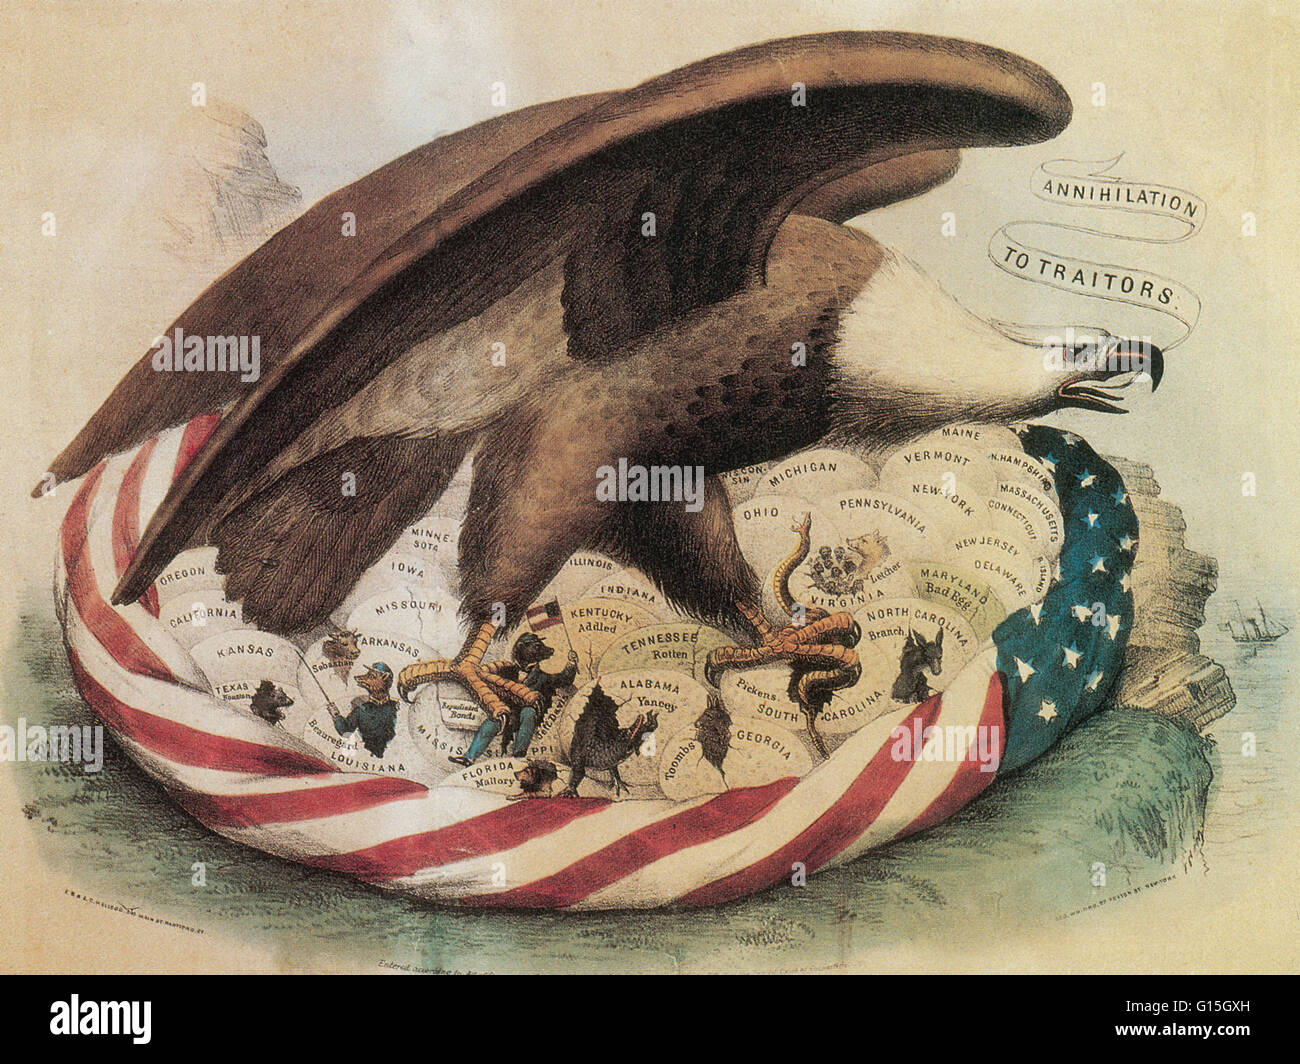 This lithograph is entitled 'The Eagle's Nest' and the caption reads: Colored lithograph published by the Kellog brothers, 1861. Shows the American flag as a nest filled with eggs each given the name of one of the states in the union. Many of the southern Stock Photo